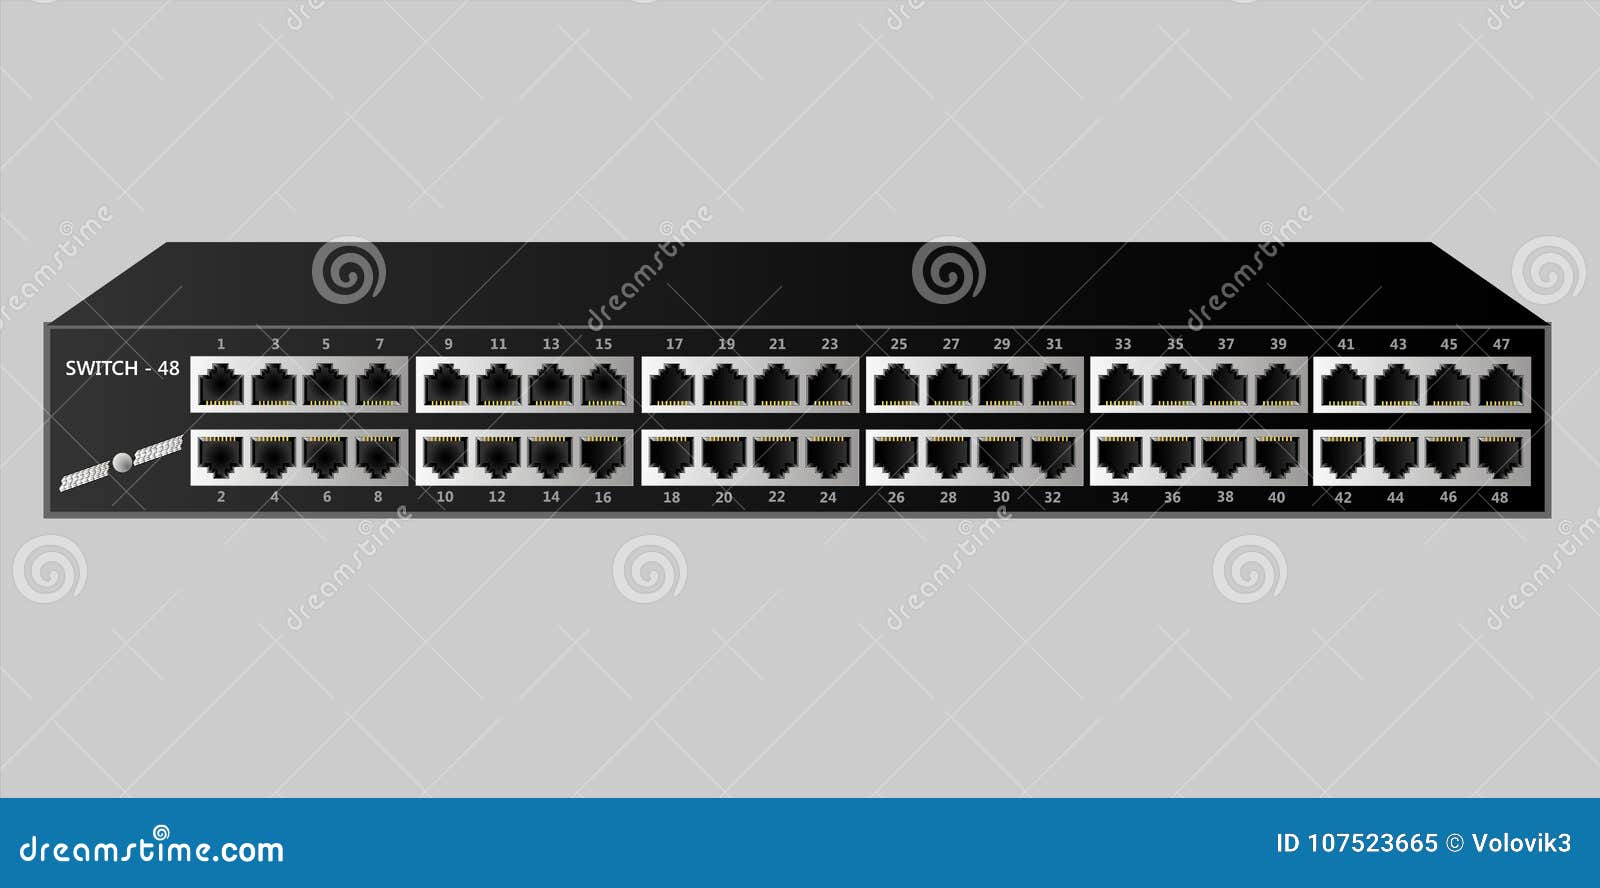 ethernet switch with 48 ports. the name and emblem are invented.